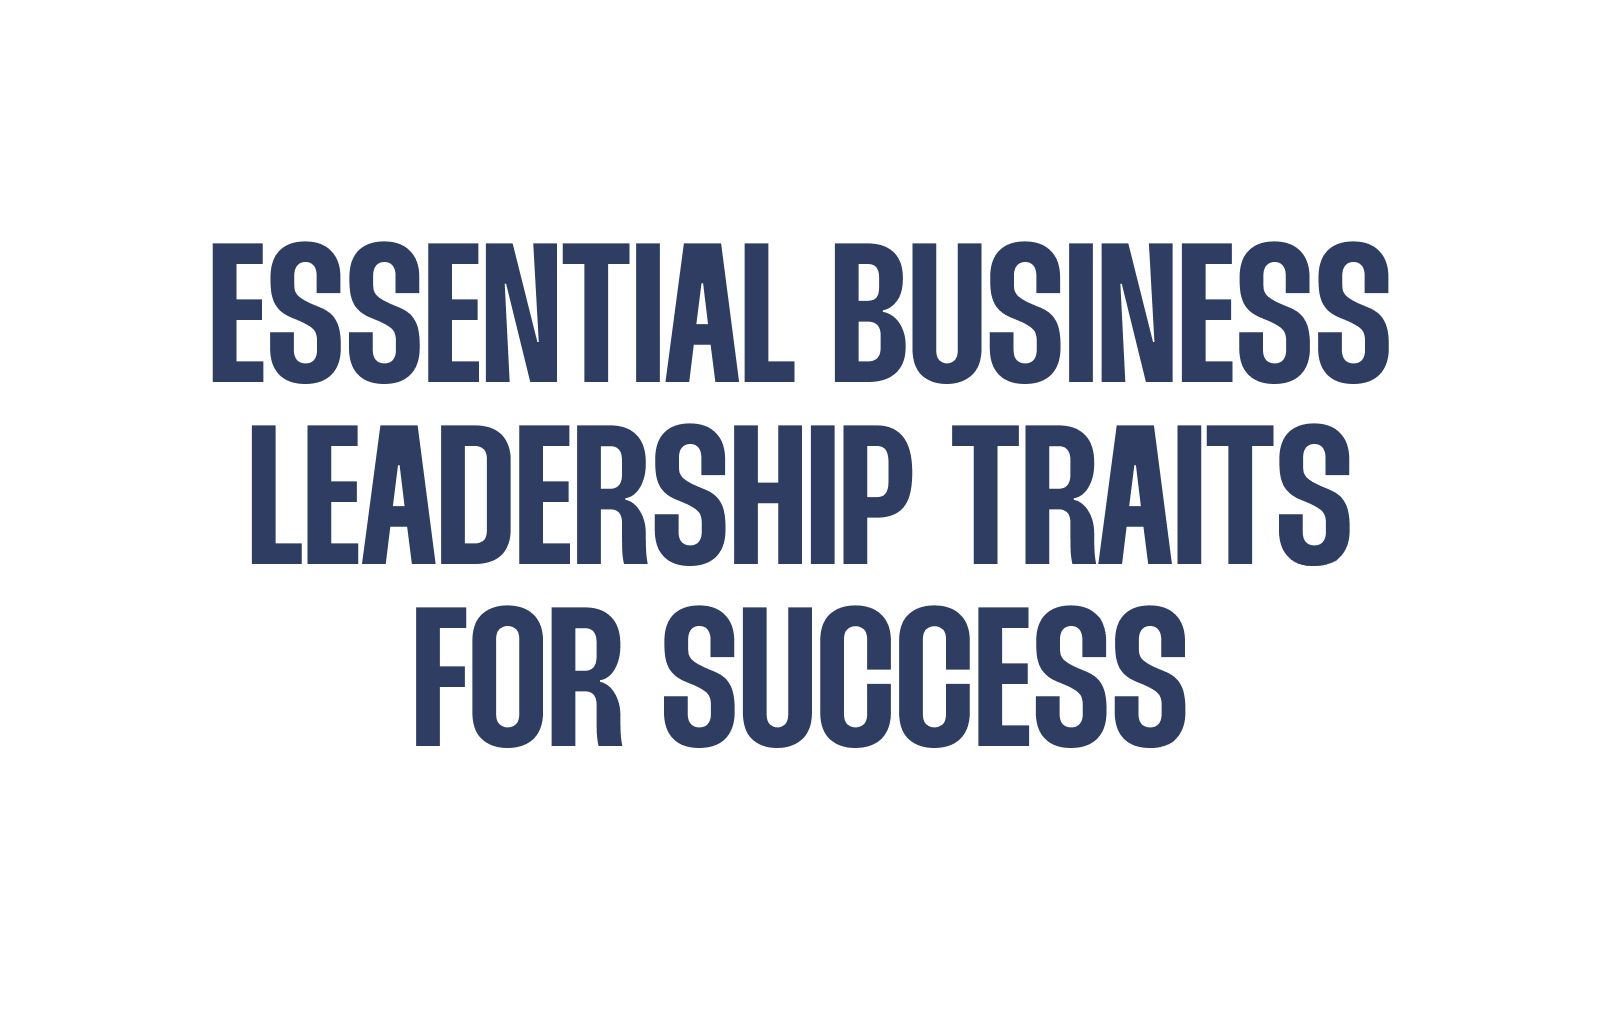 Essential Business Leadership Traits for Success